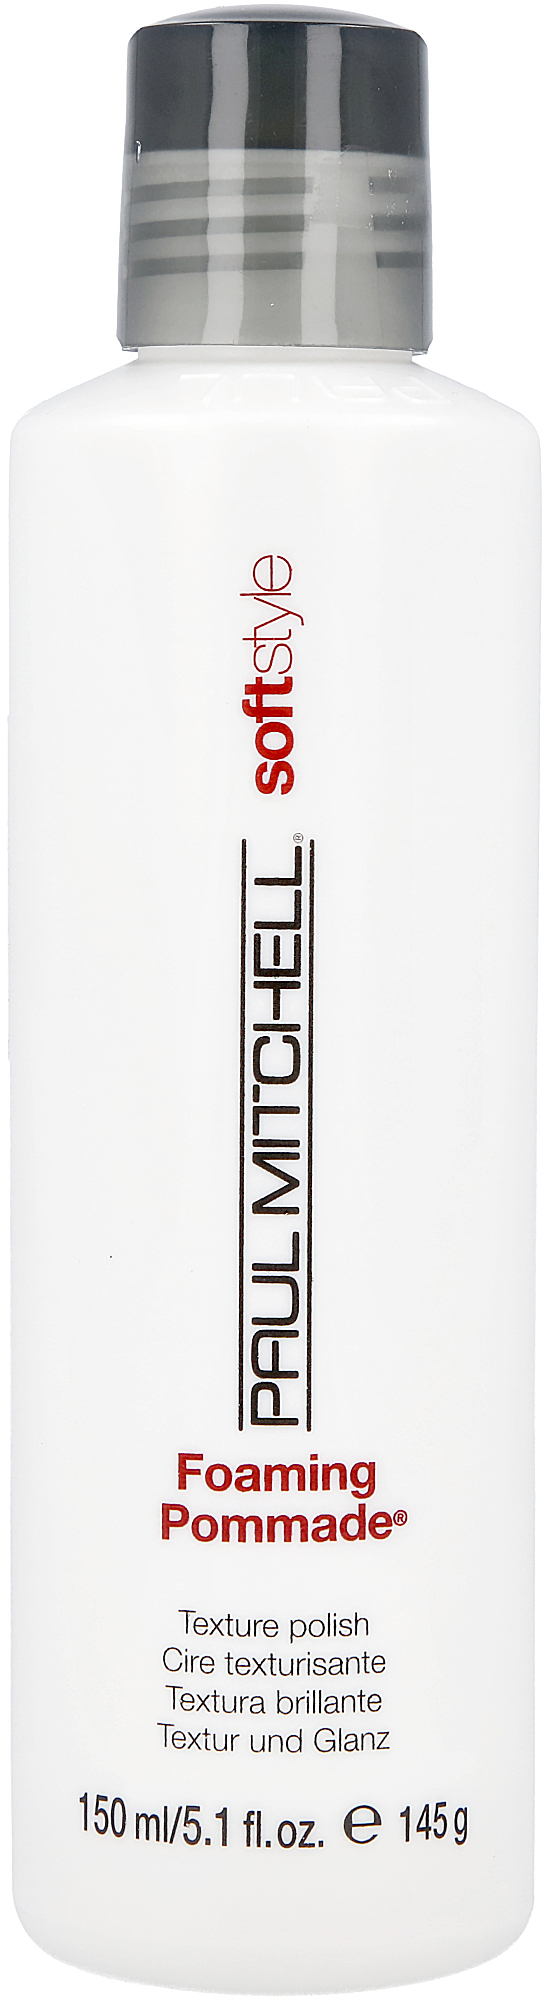 Paul Mitchell Soft Style Foaming Pommade 150 ml 